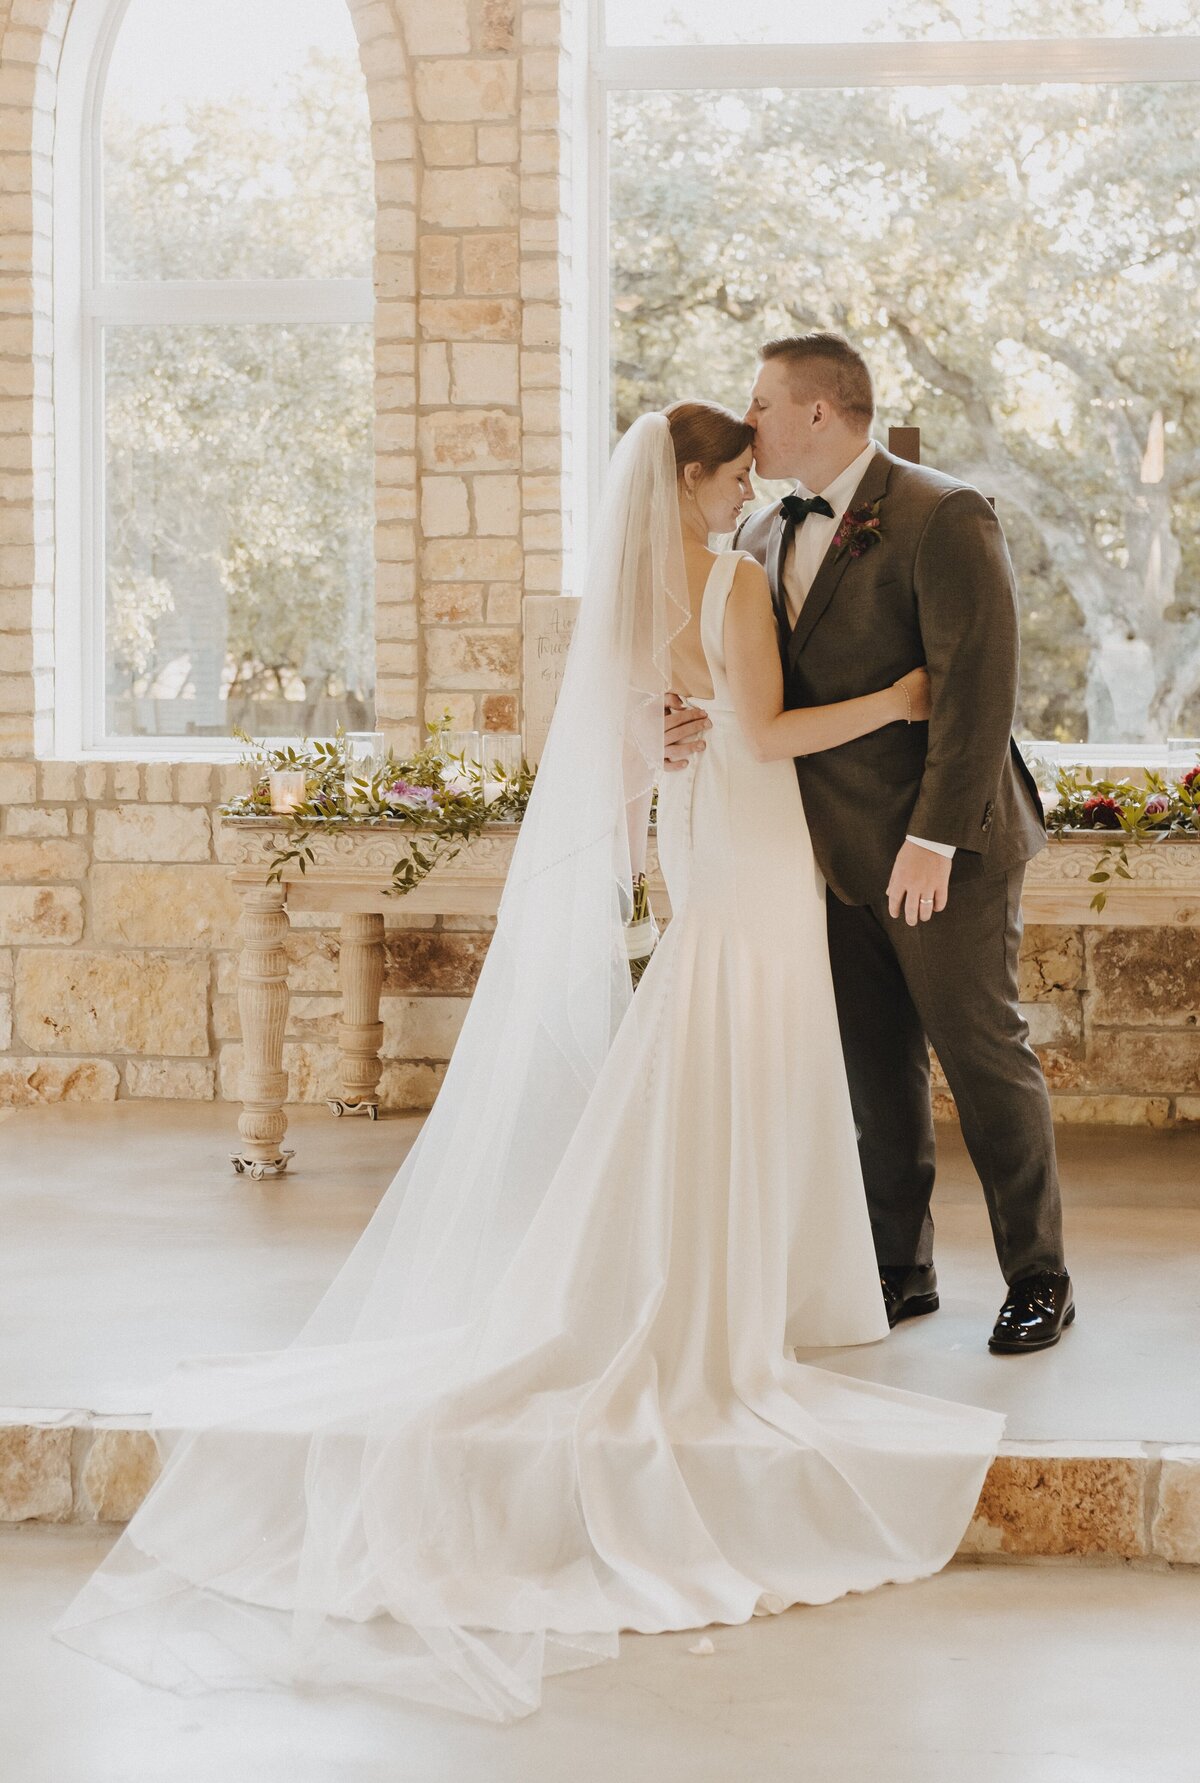 Newly married couple at the altar in the chapel of the french farmhouse in Collinsville | Photos by Meggie